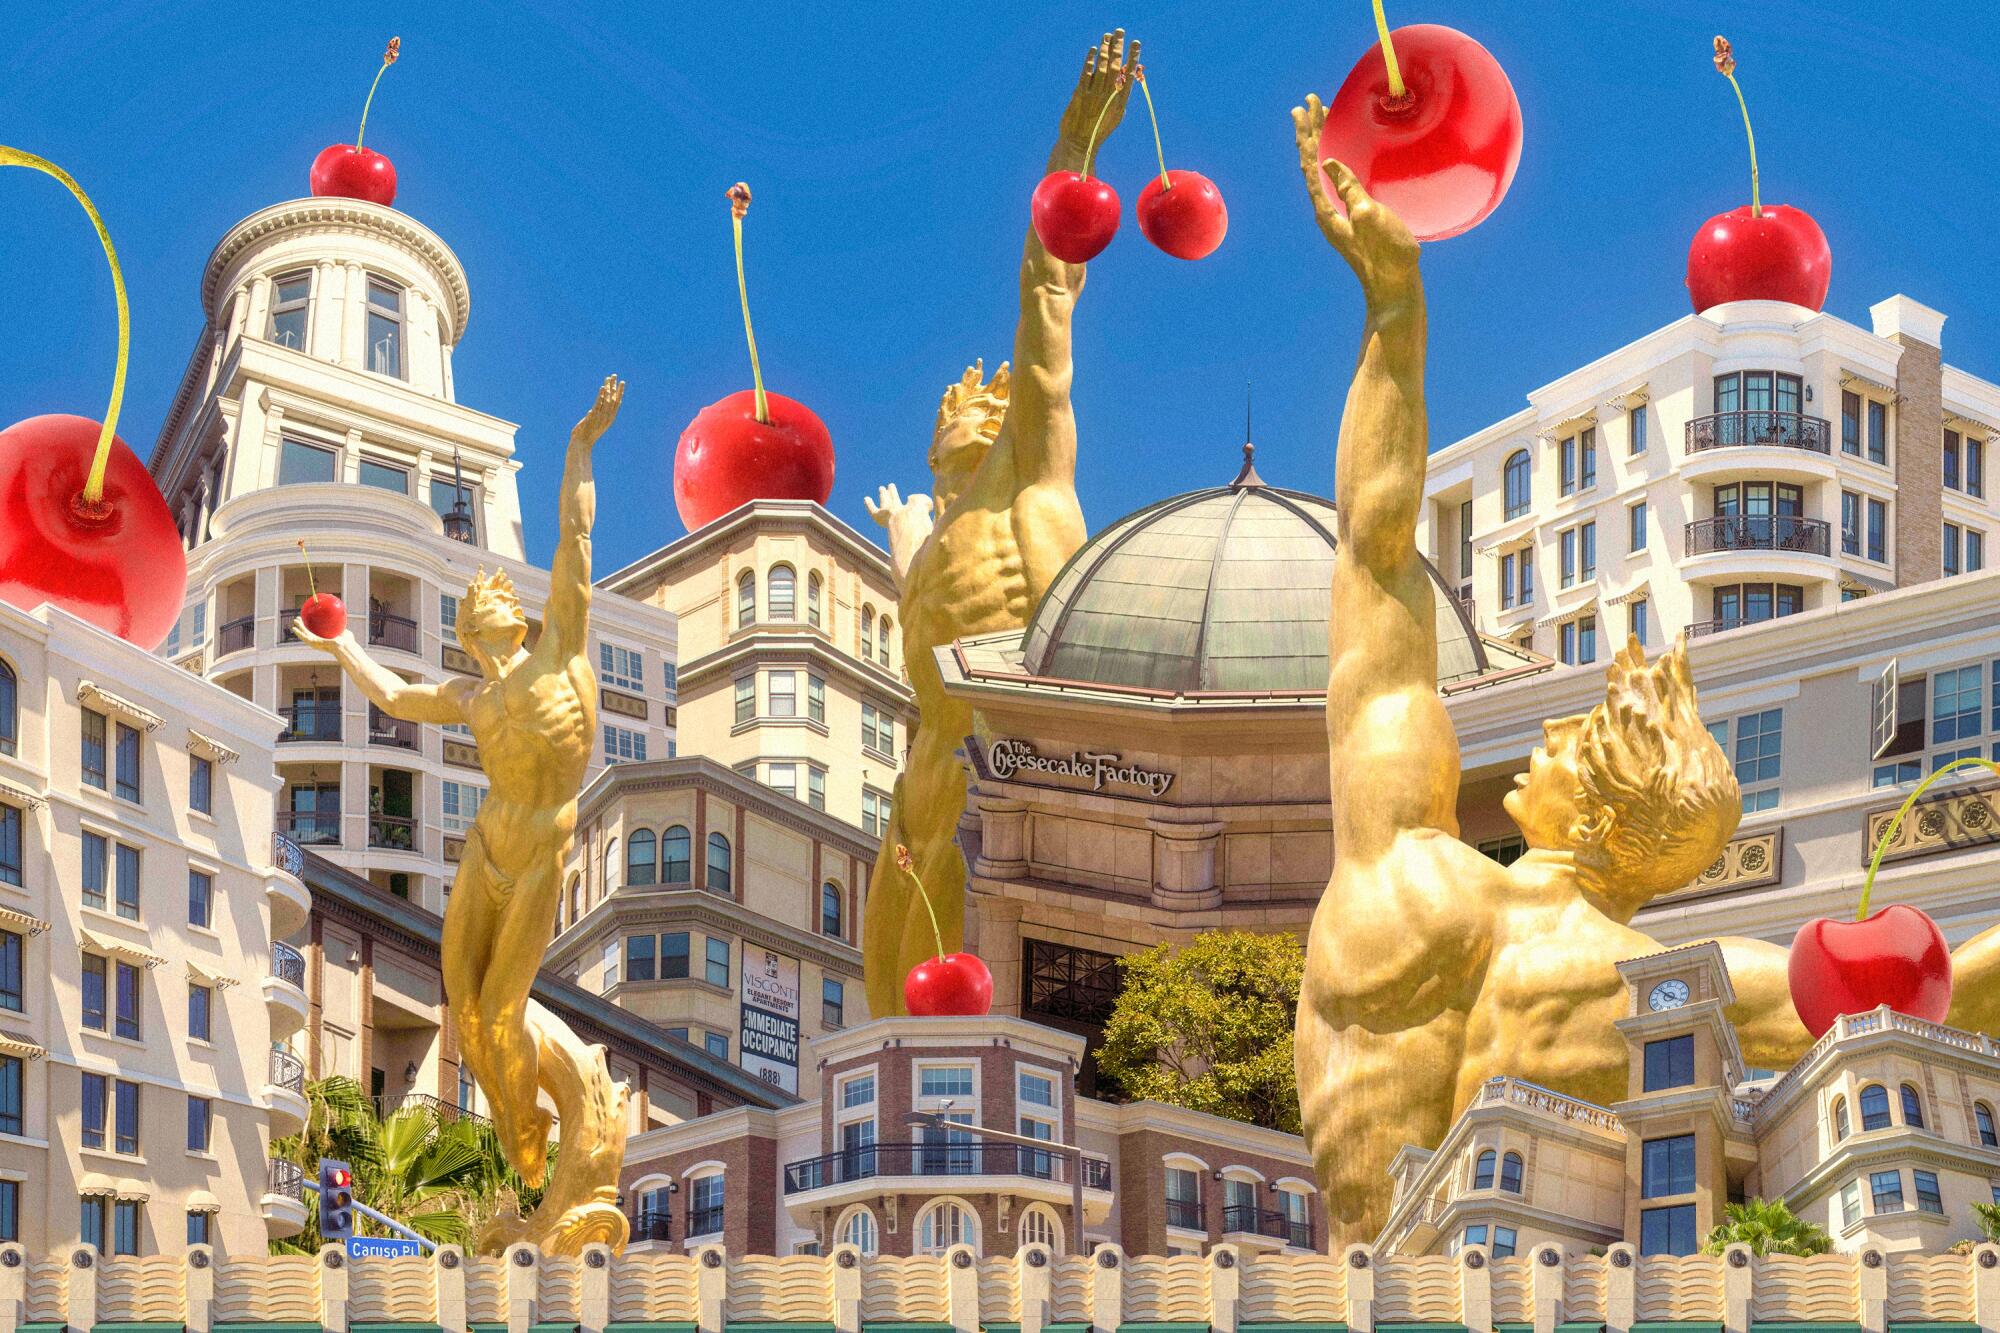 collage of beige, Italian-style buildings stacked on top of each other and topped with cherries, and three gold statues